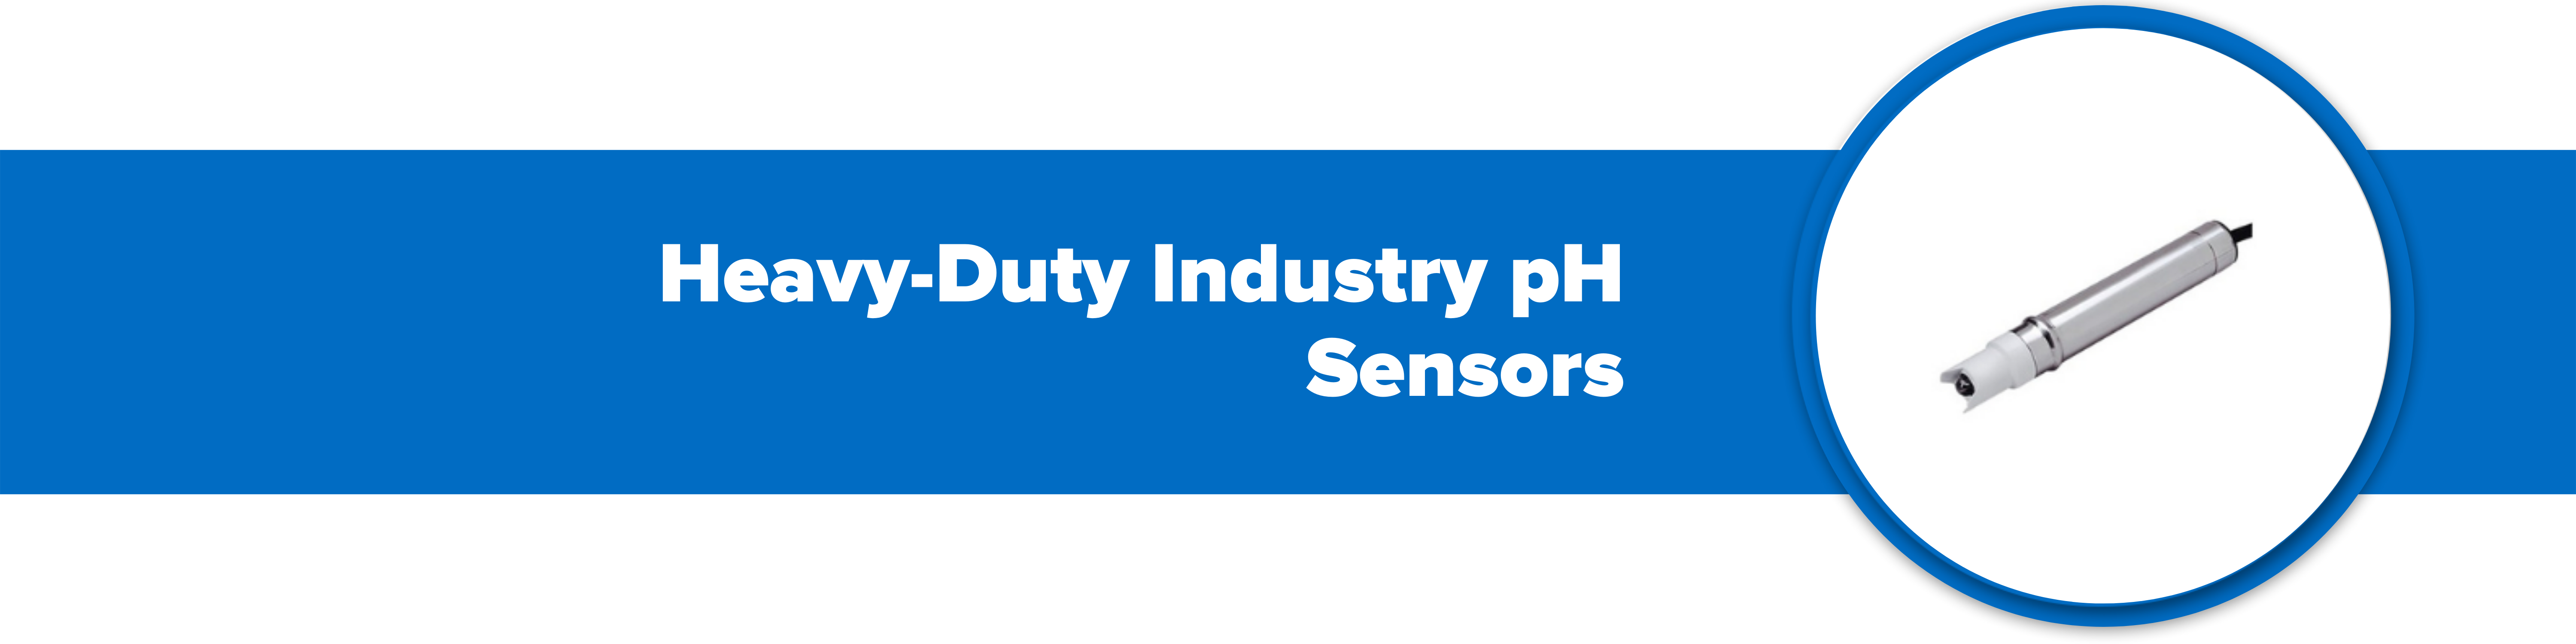 Header image with text 'heavy-duty industry pH sensors'.